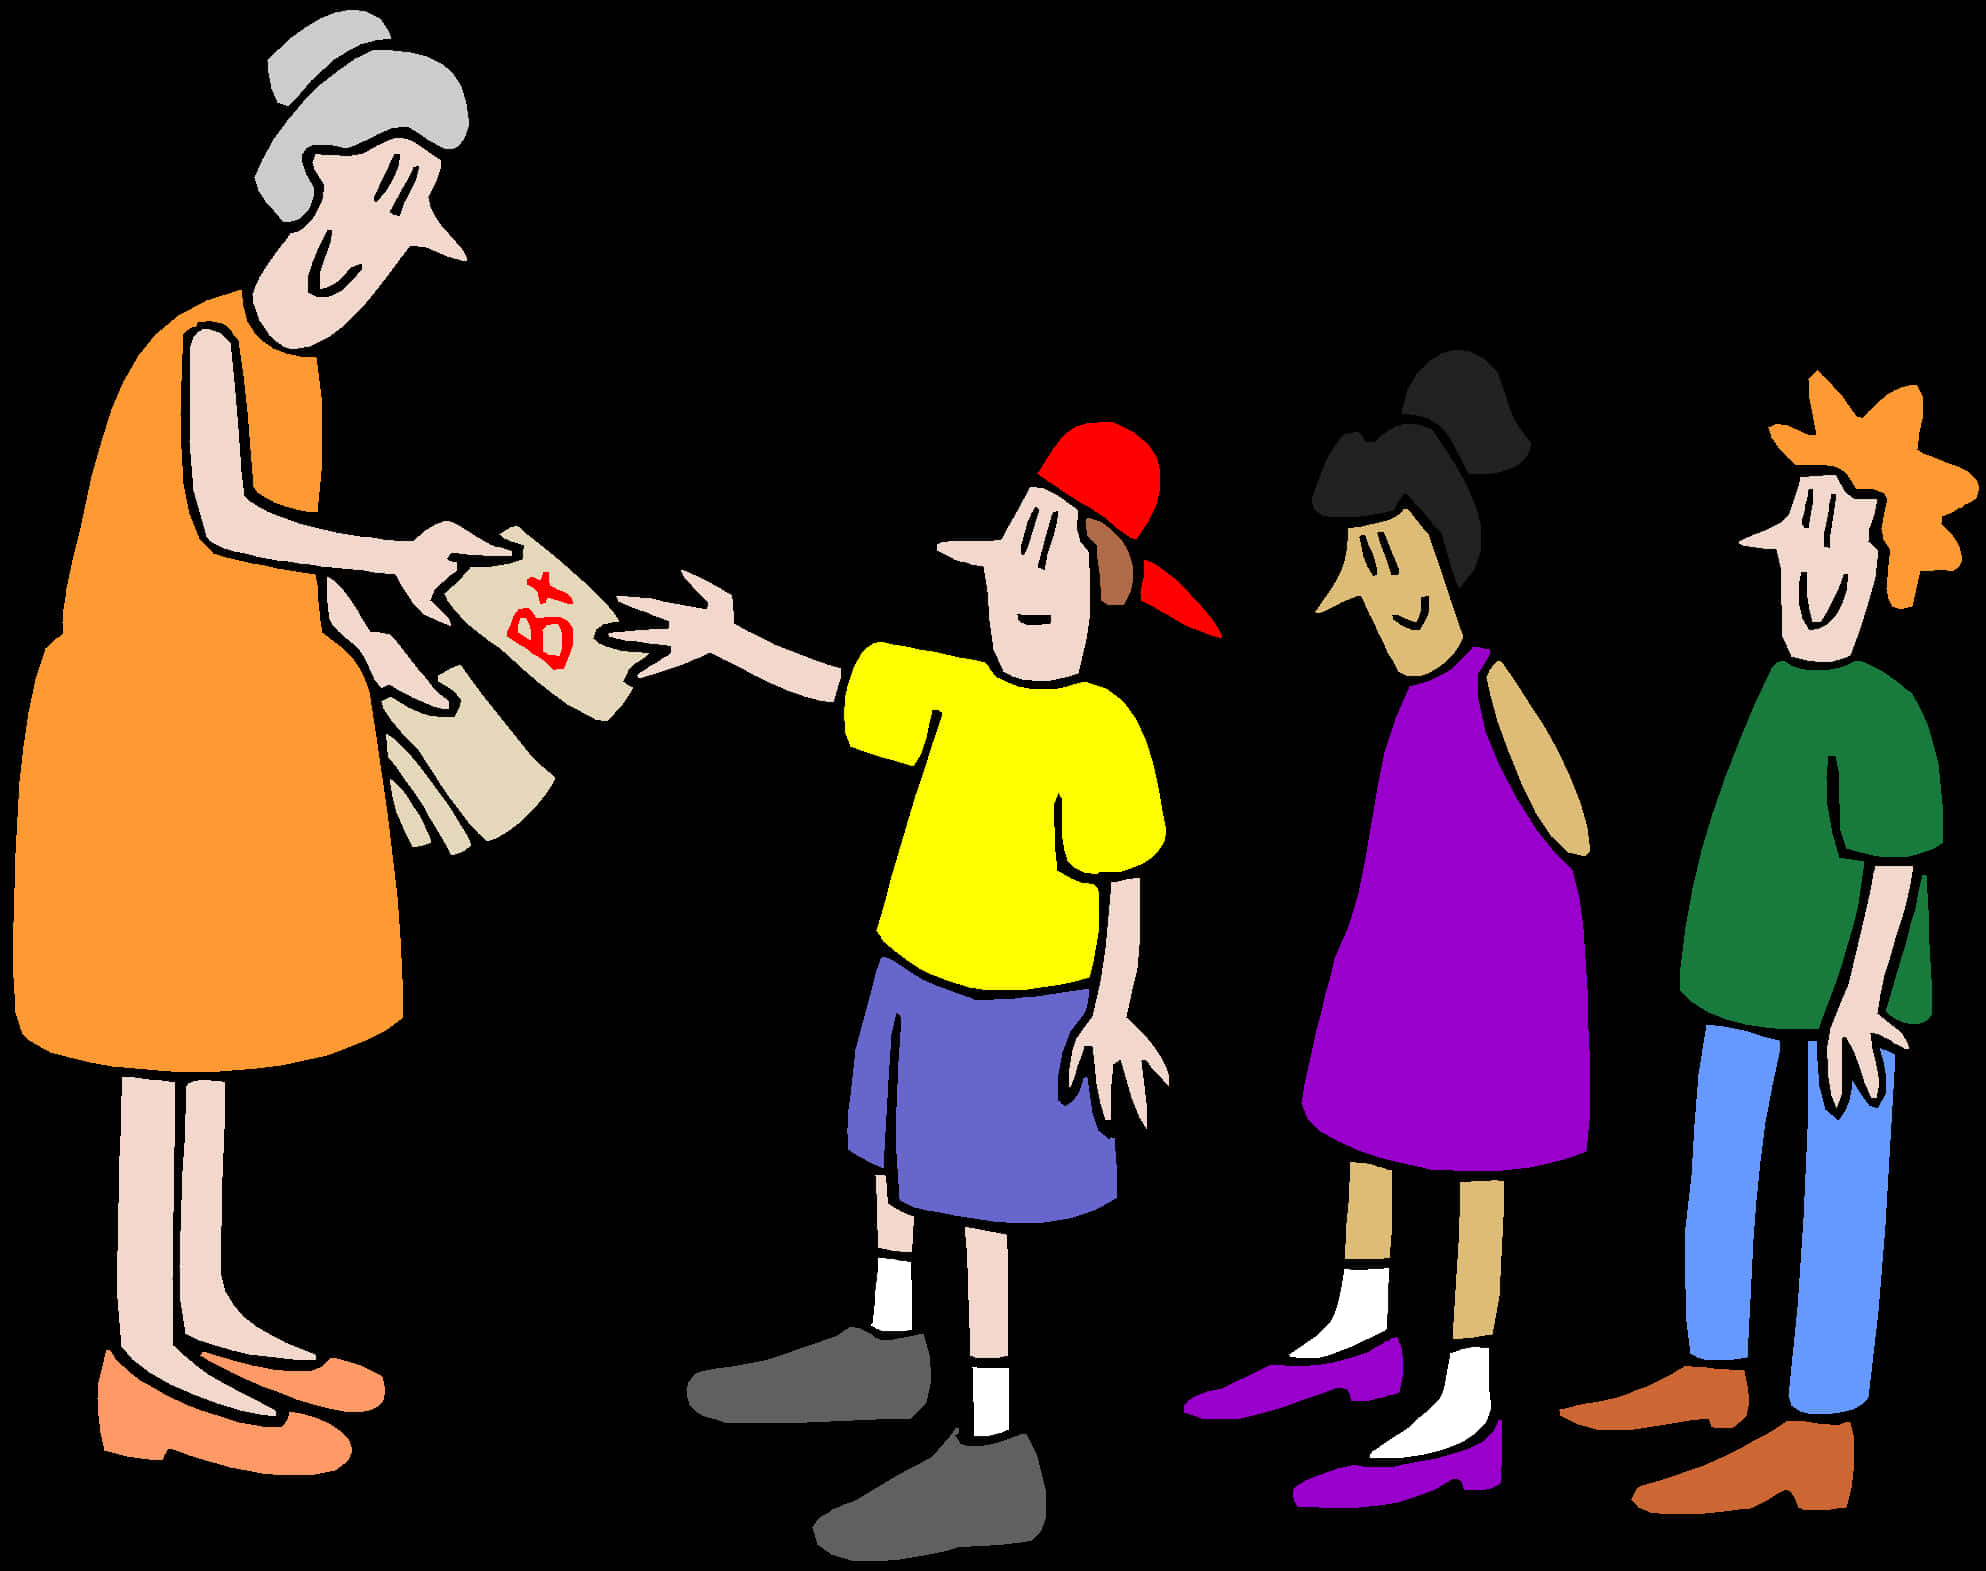 A Cartoon Of A Woman Giving A Child A Gift